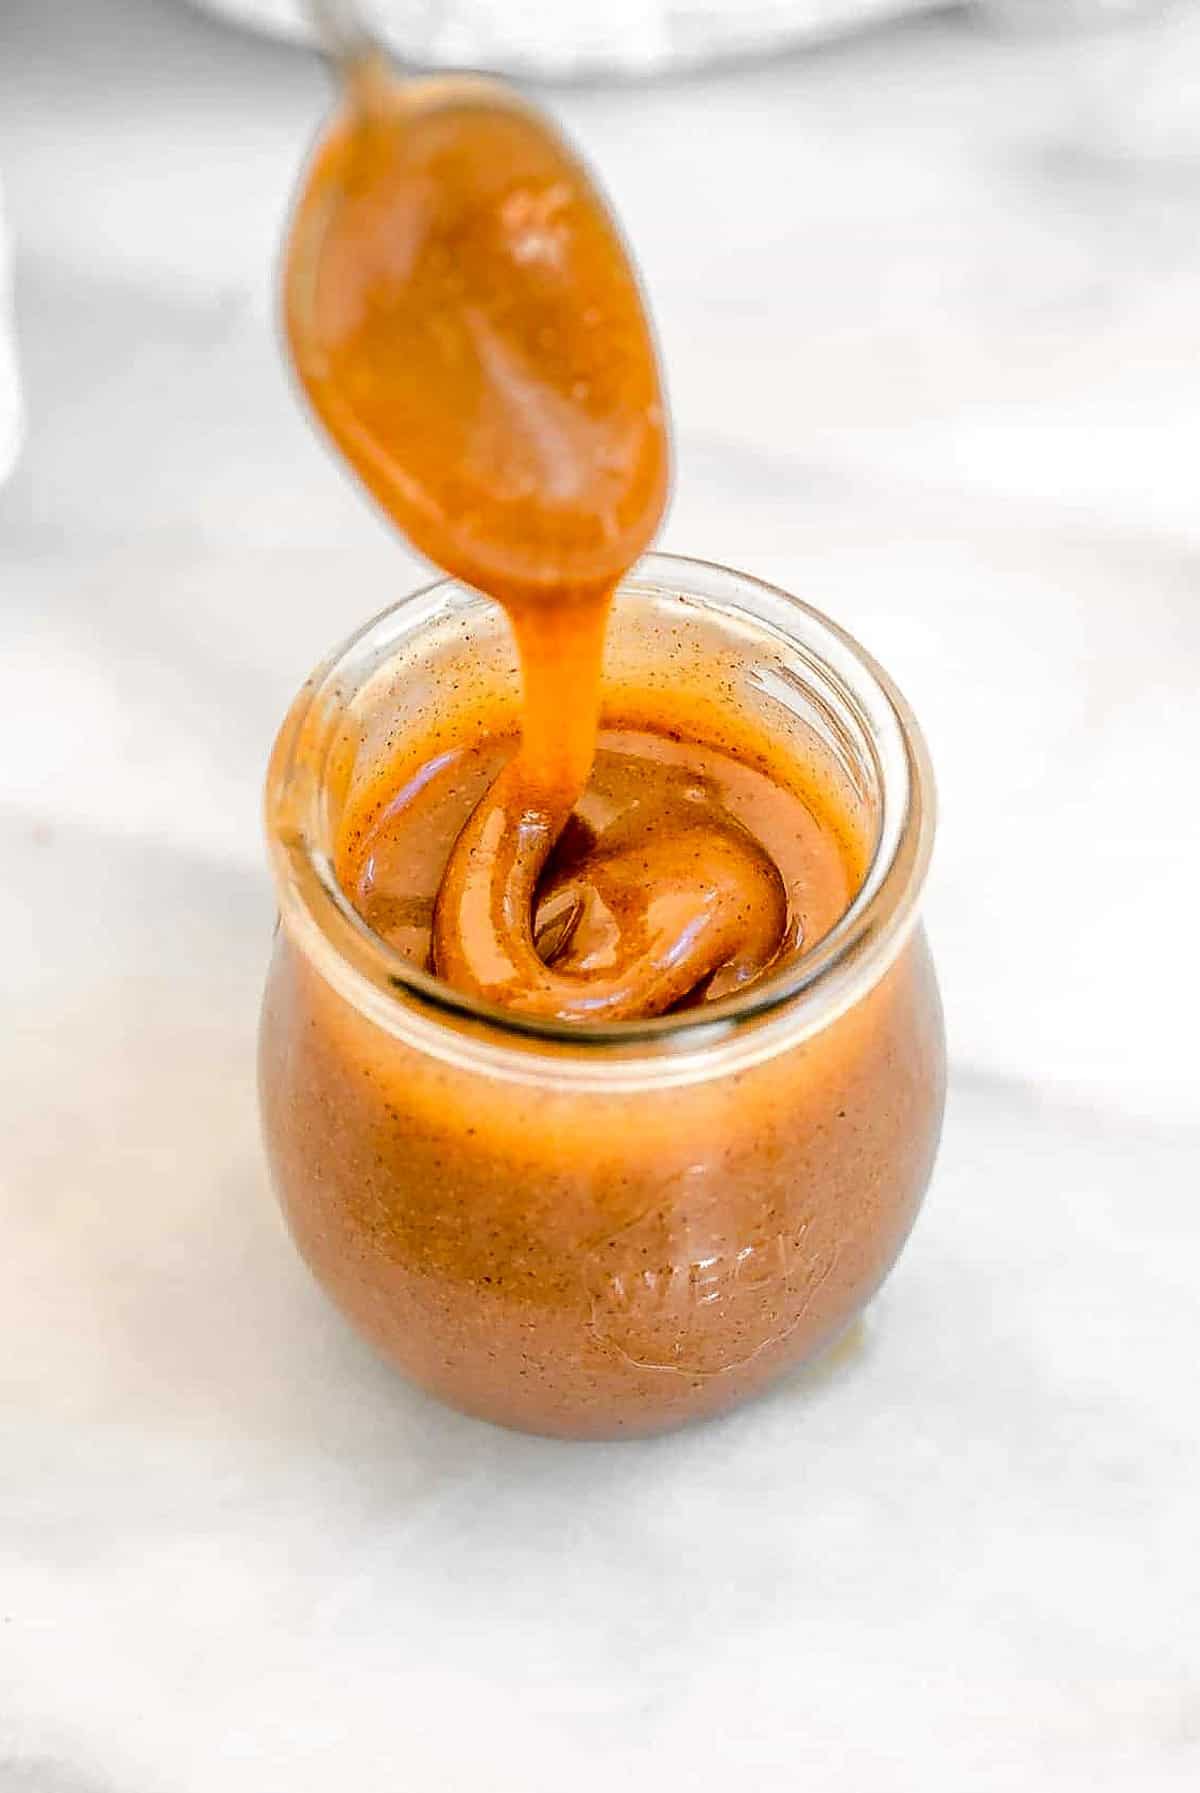 Spoon scooping out the vegan caramel from a glass jar.